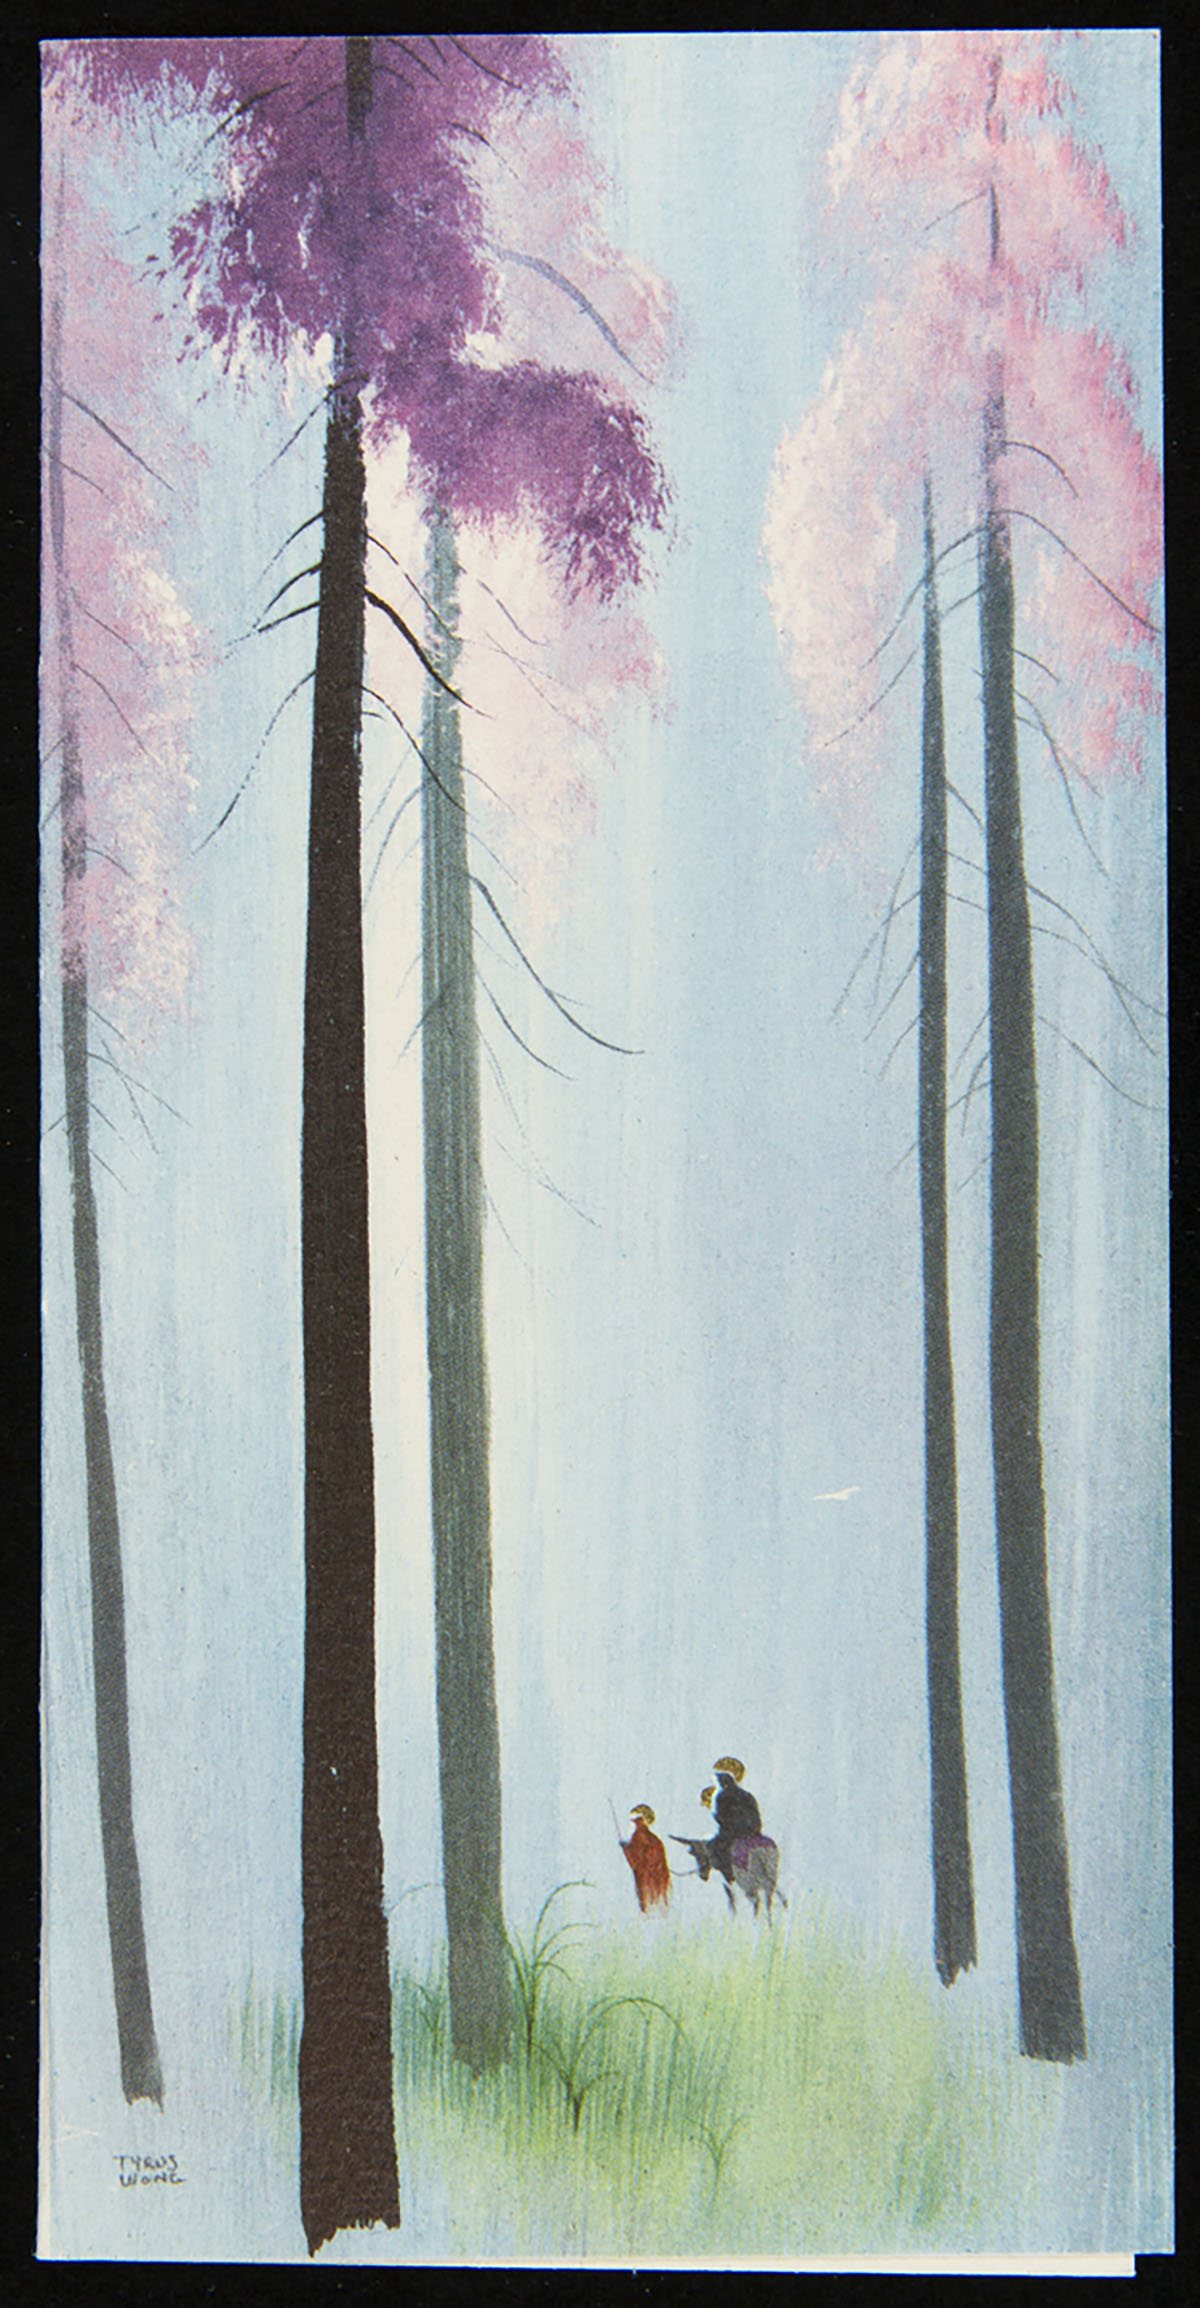 Enchanted Forest, designed by Tyrus Wong for California Artists, 1955.